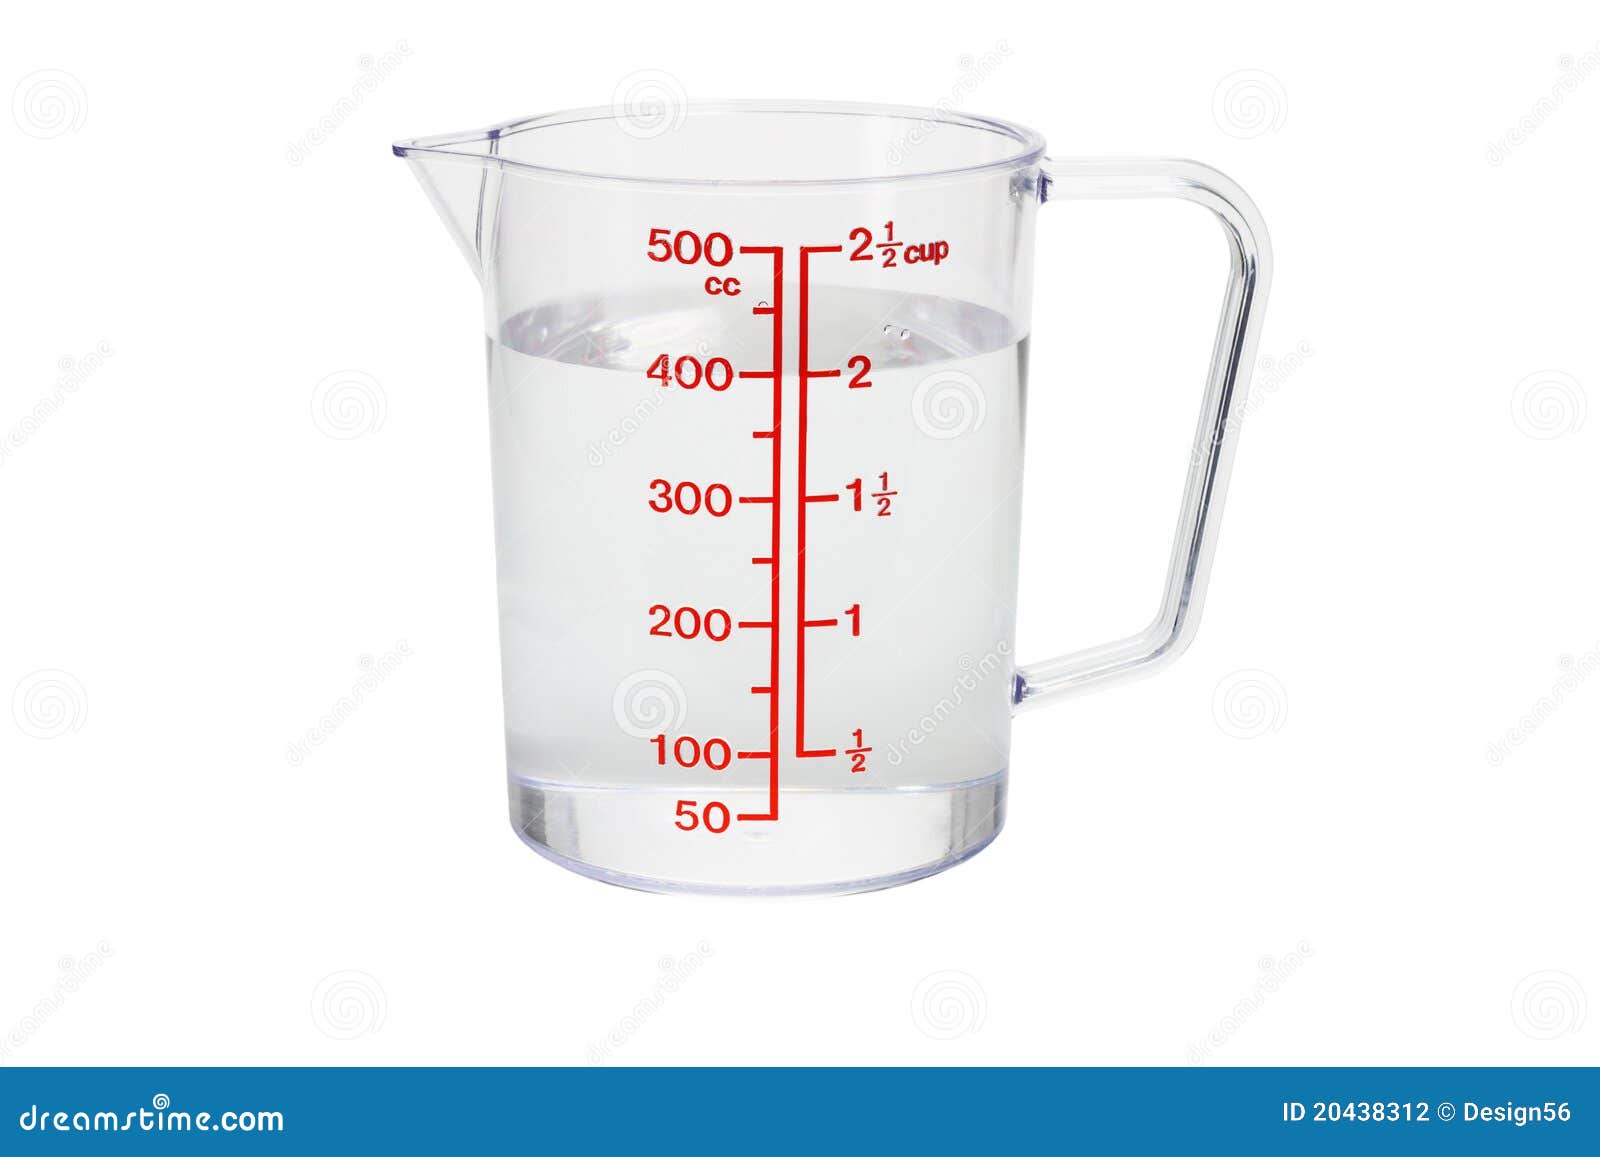 Standard Measuring Cup, 1000ml – Cheapest Hydro